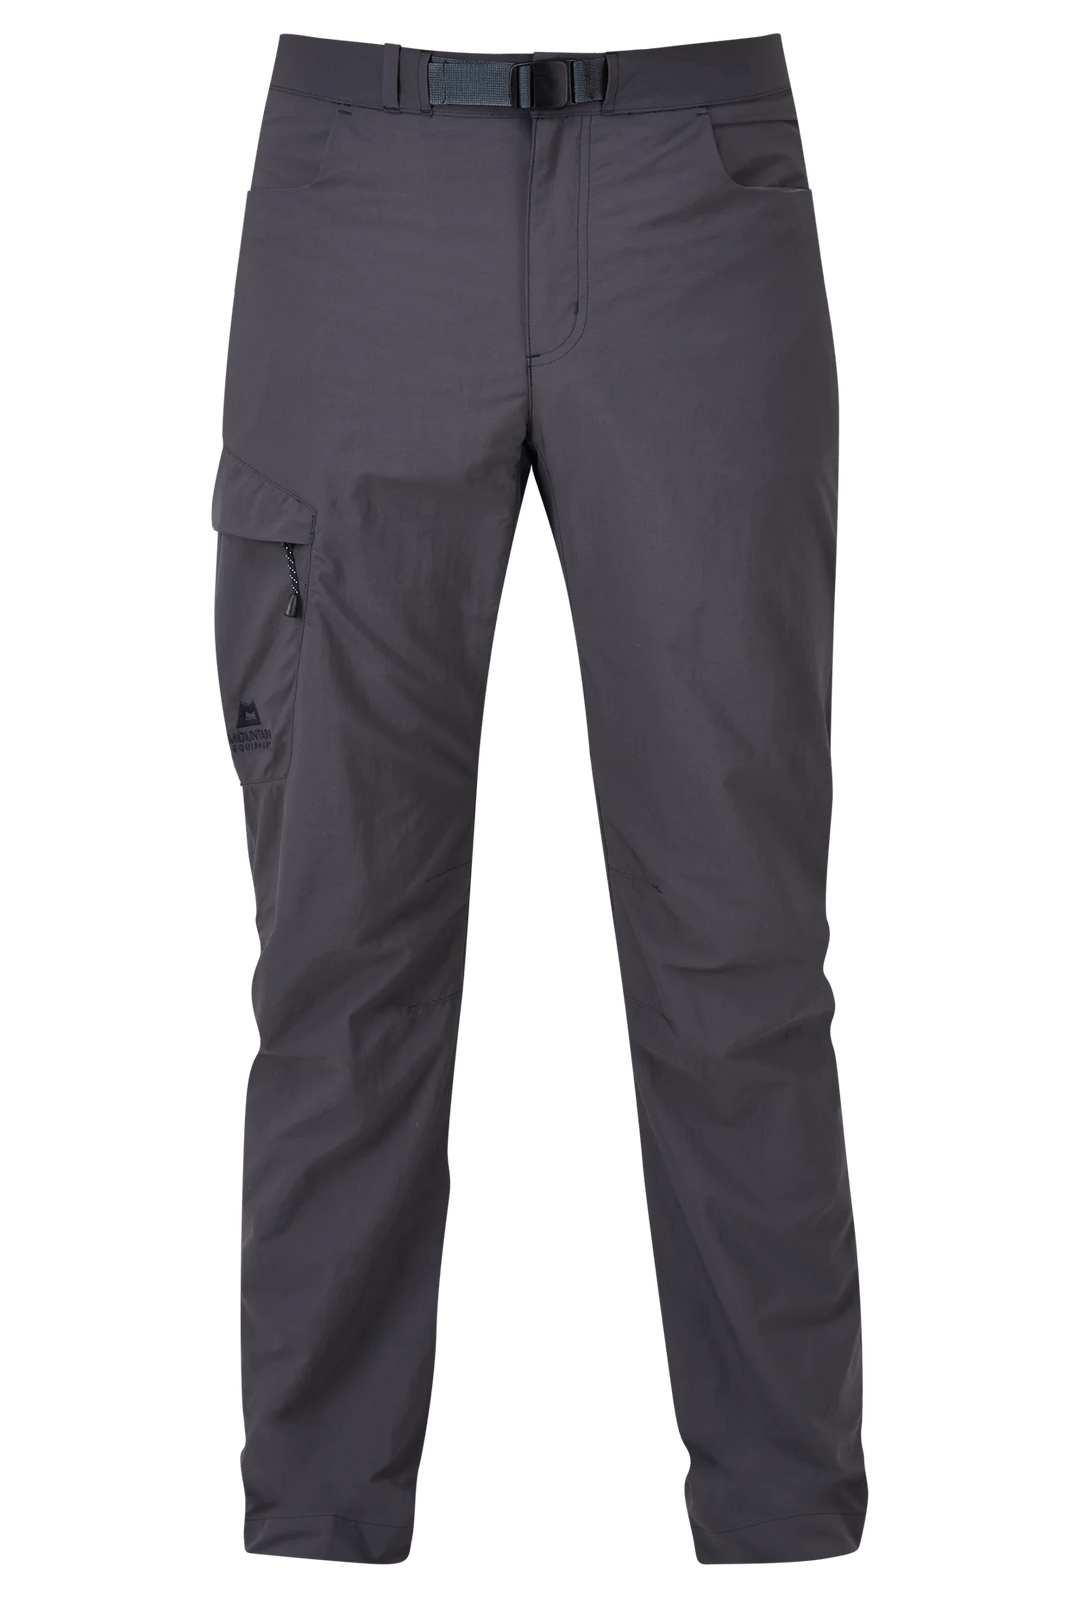 Boone Mountain Sports - M INCEPTION PANT